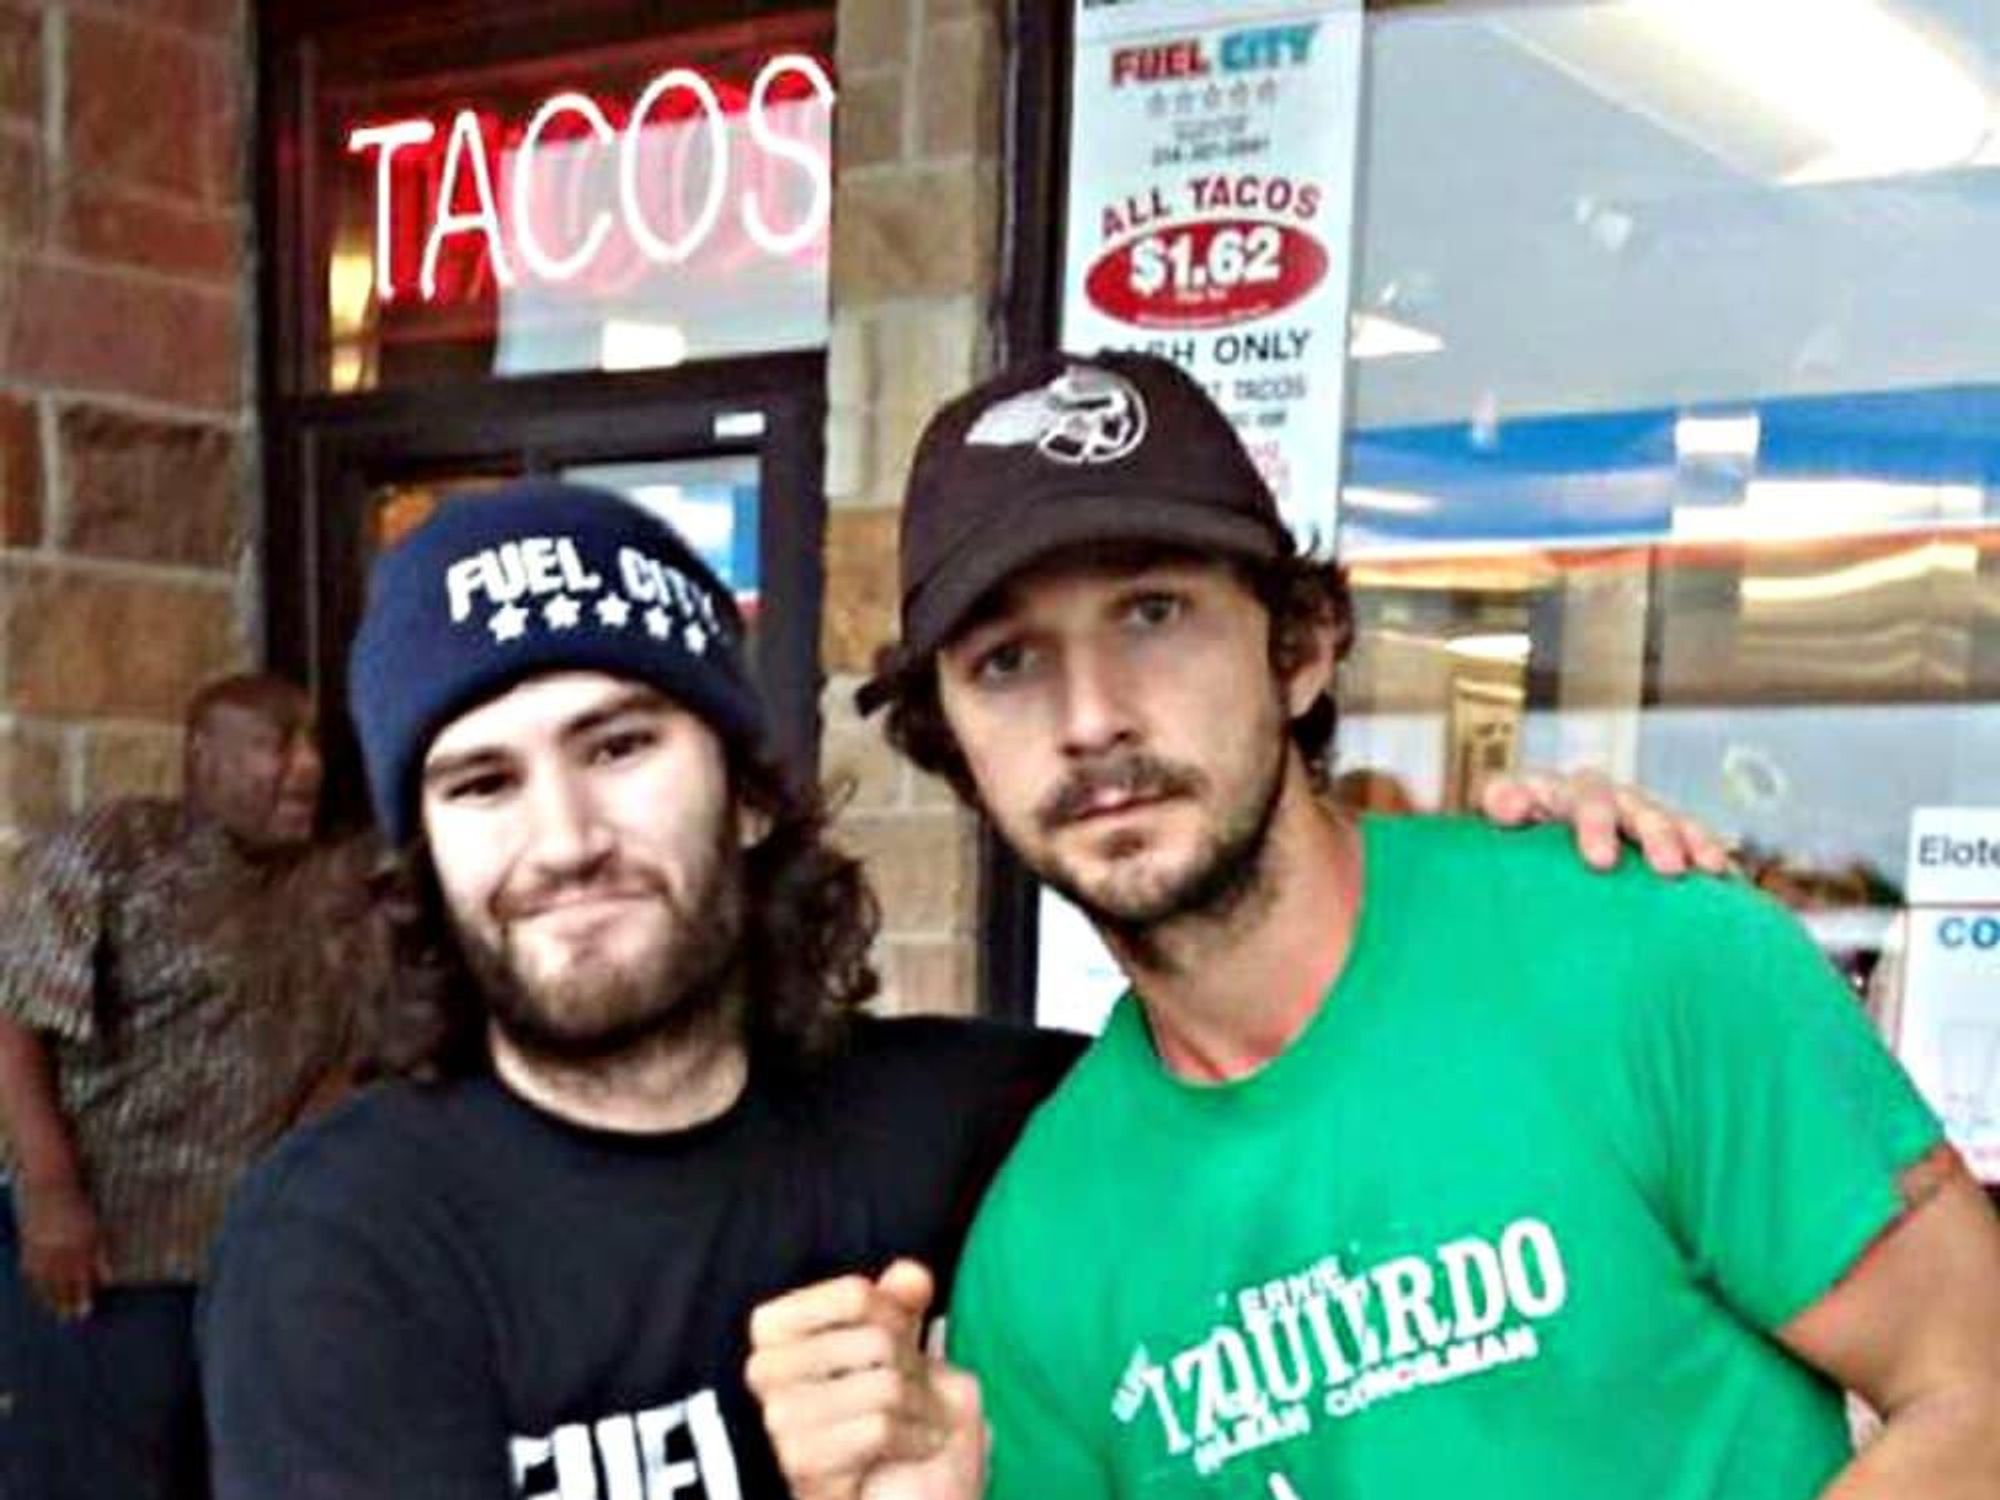 Shia LaBeouf at Fuel City in Mesquite